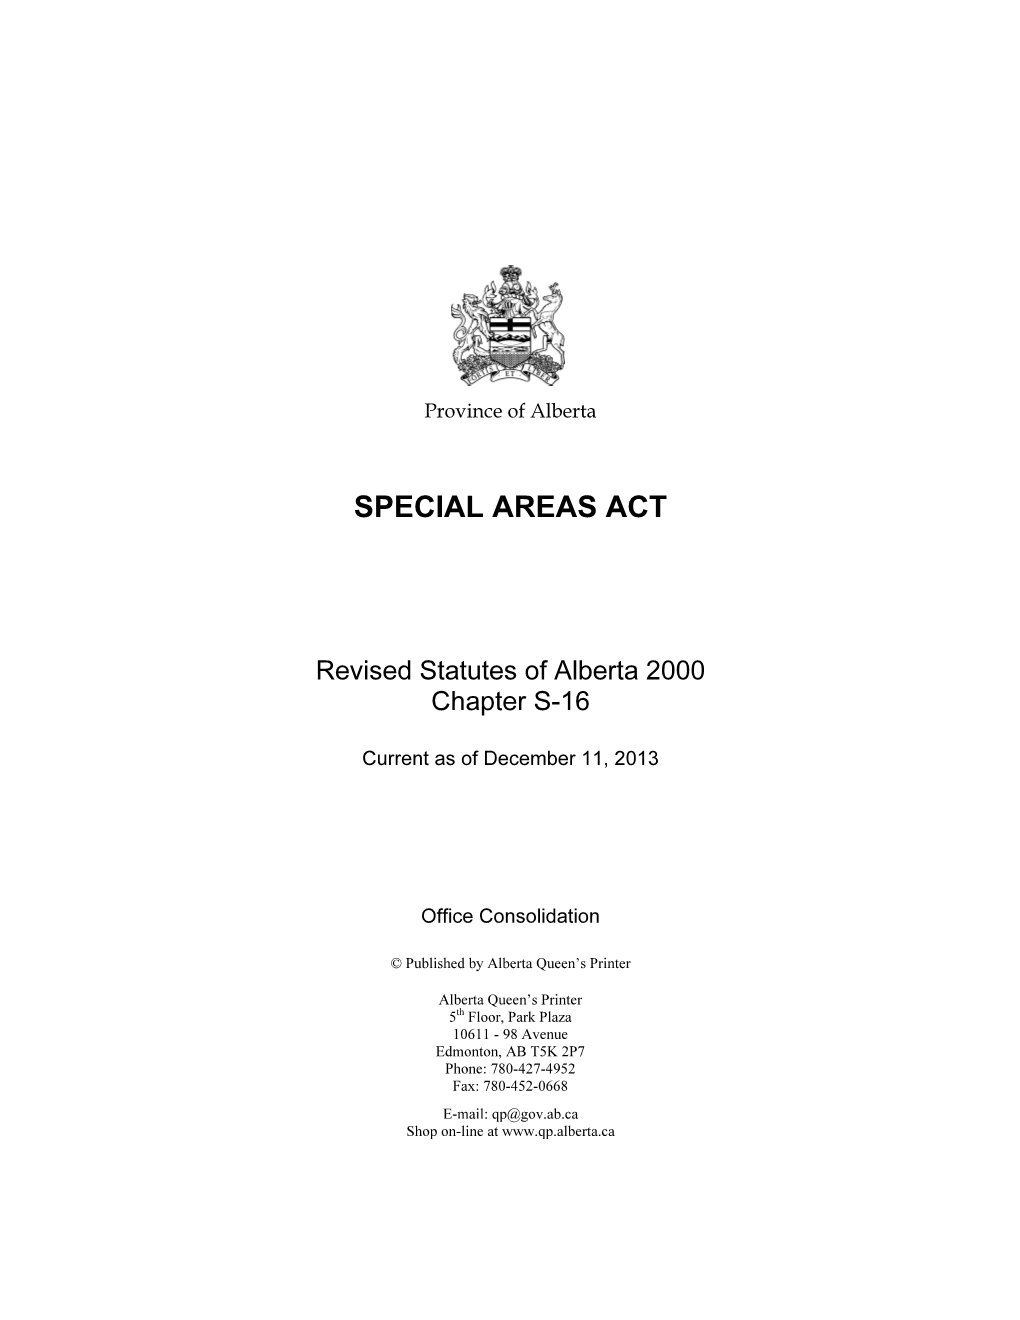 Special Areas Act